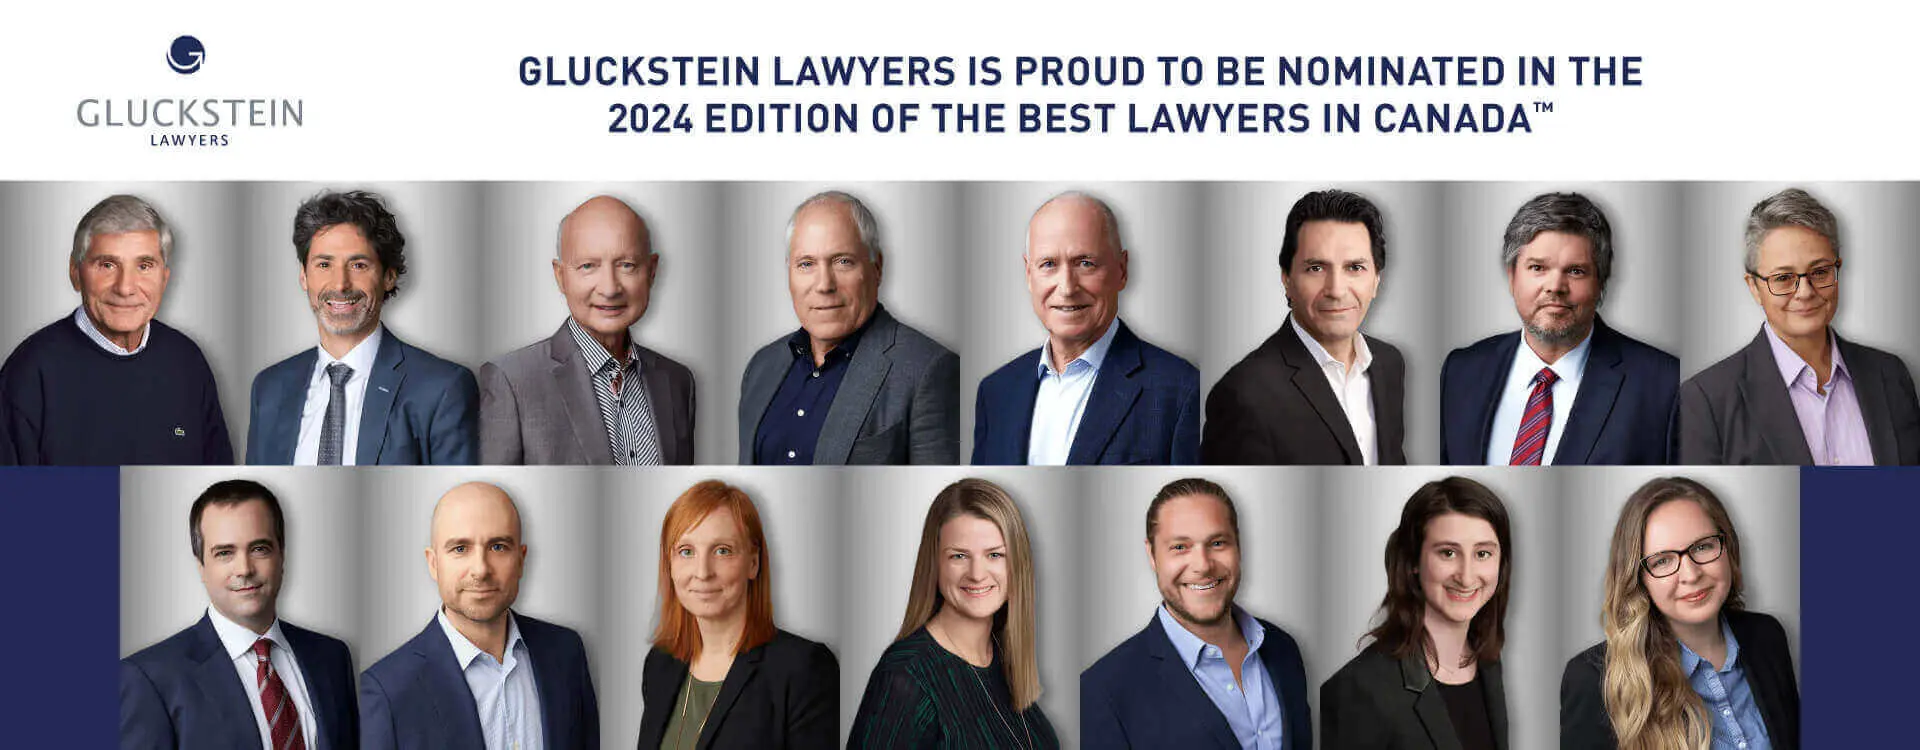 15 Gluckstein Lawyers nominated in the 2024 Edition of The Best Lawyers in Canada